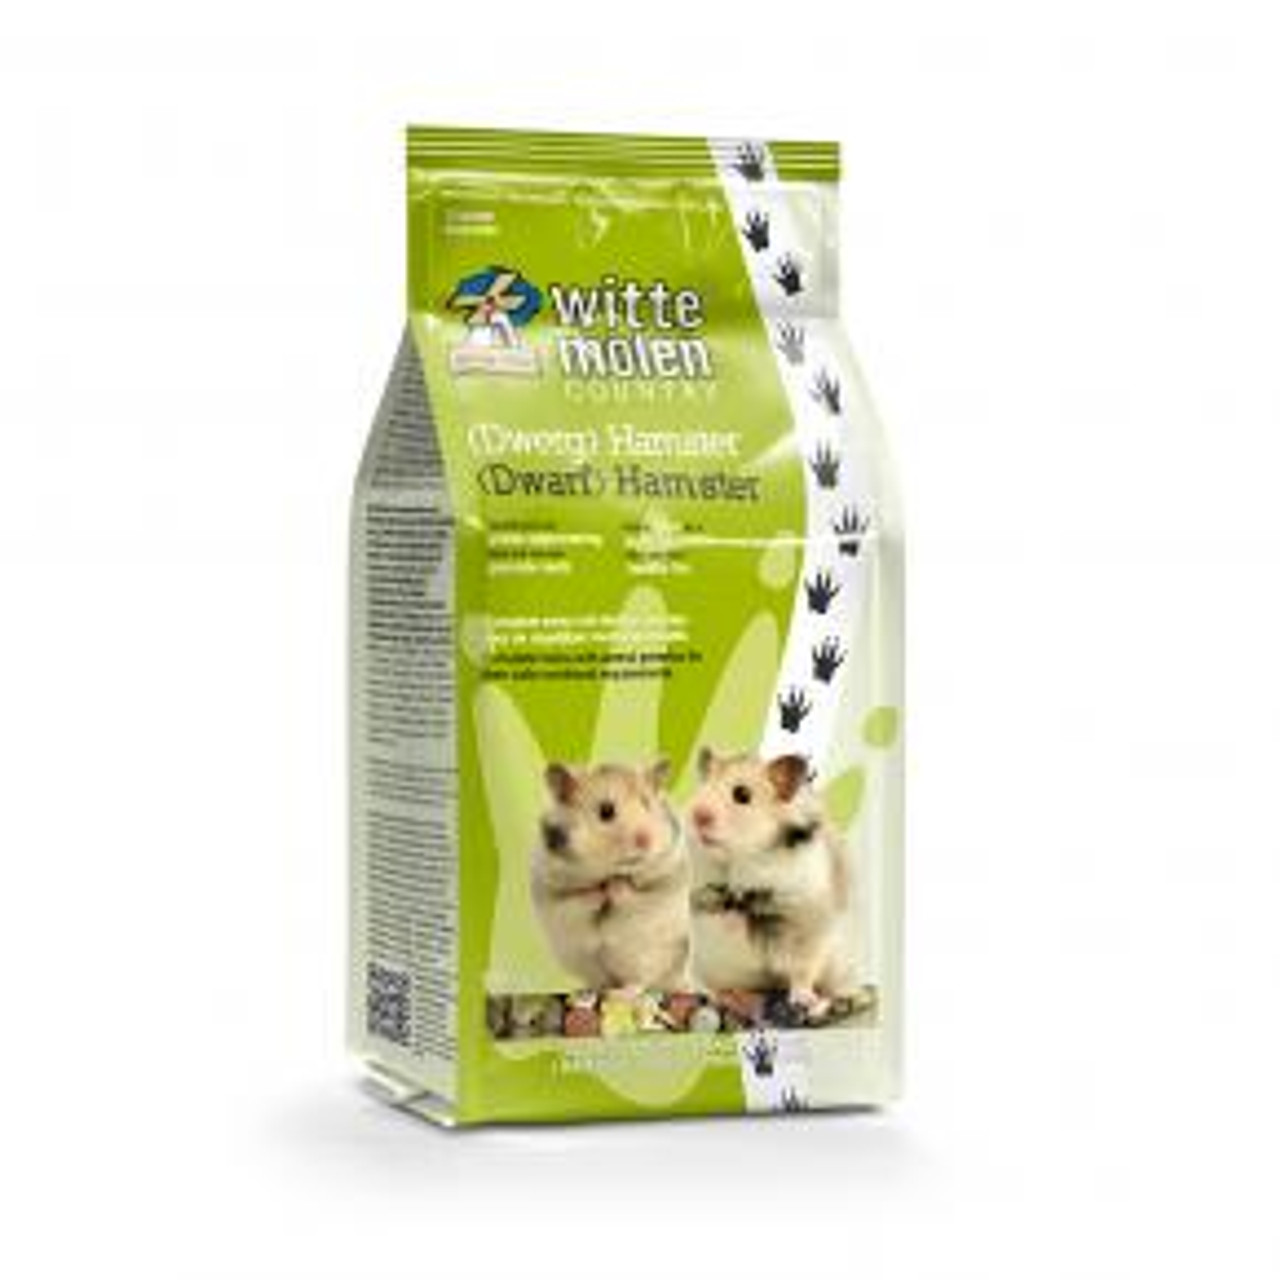 Molen Country Hamster Food 800g - Funky Pets